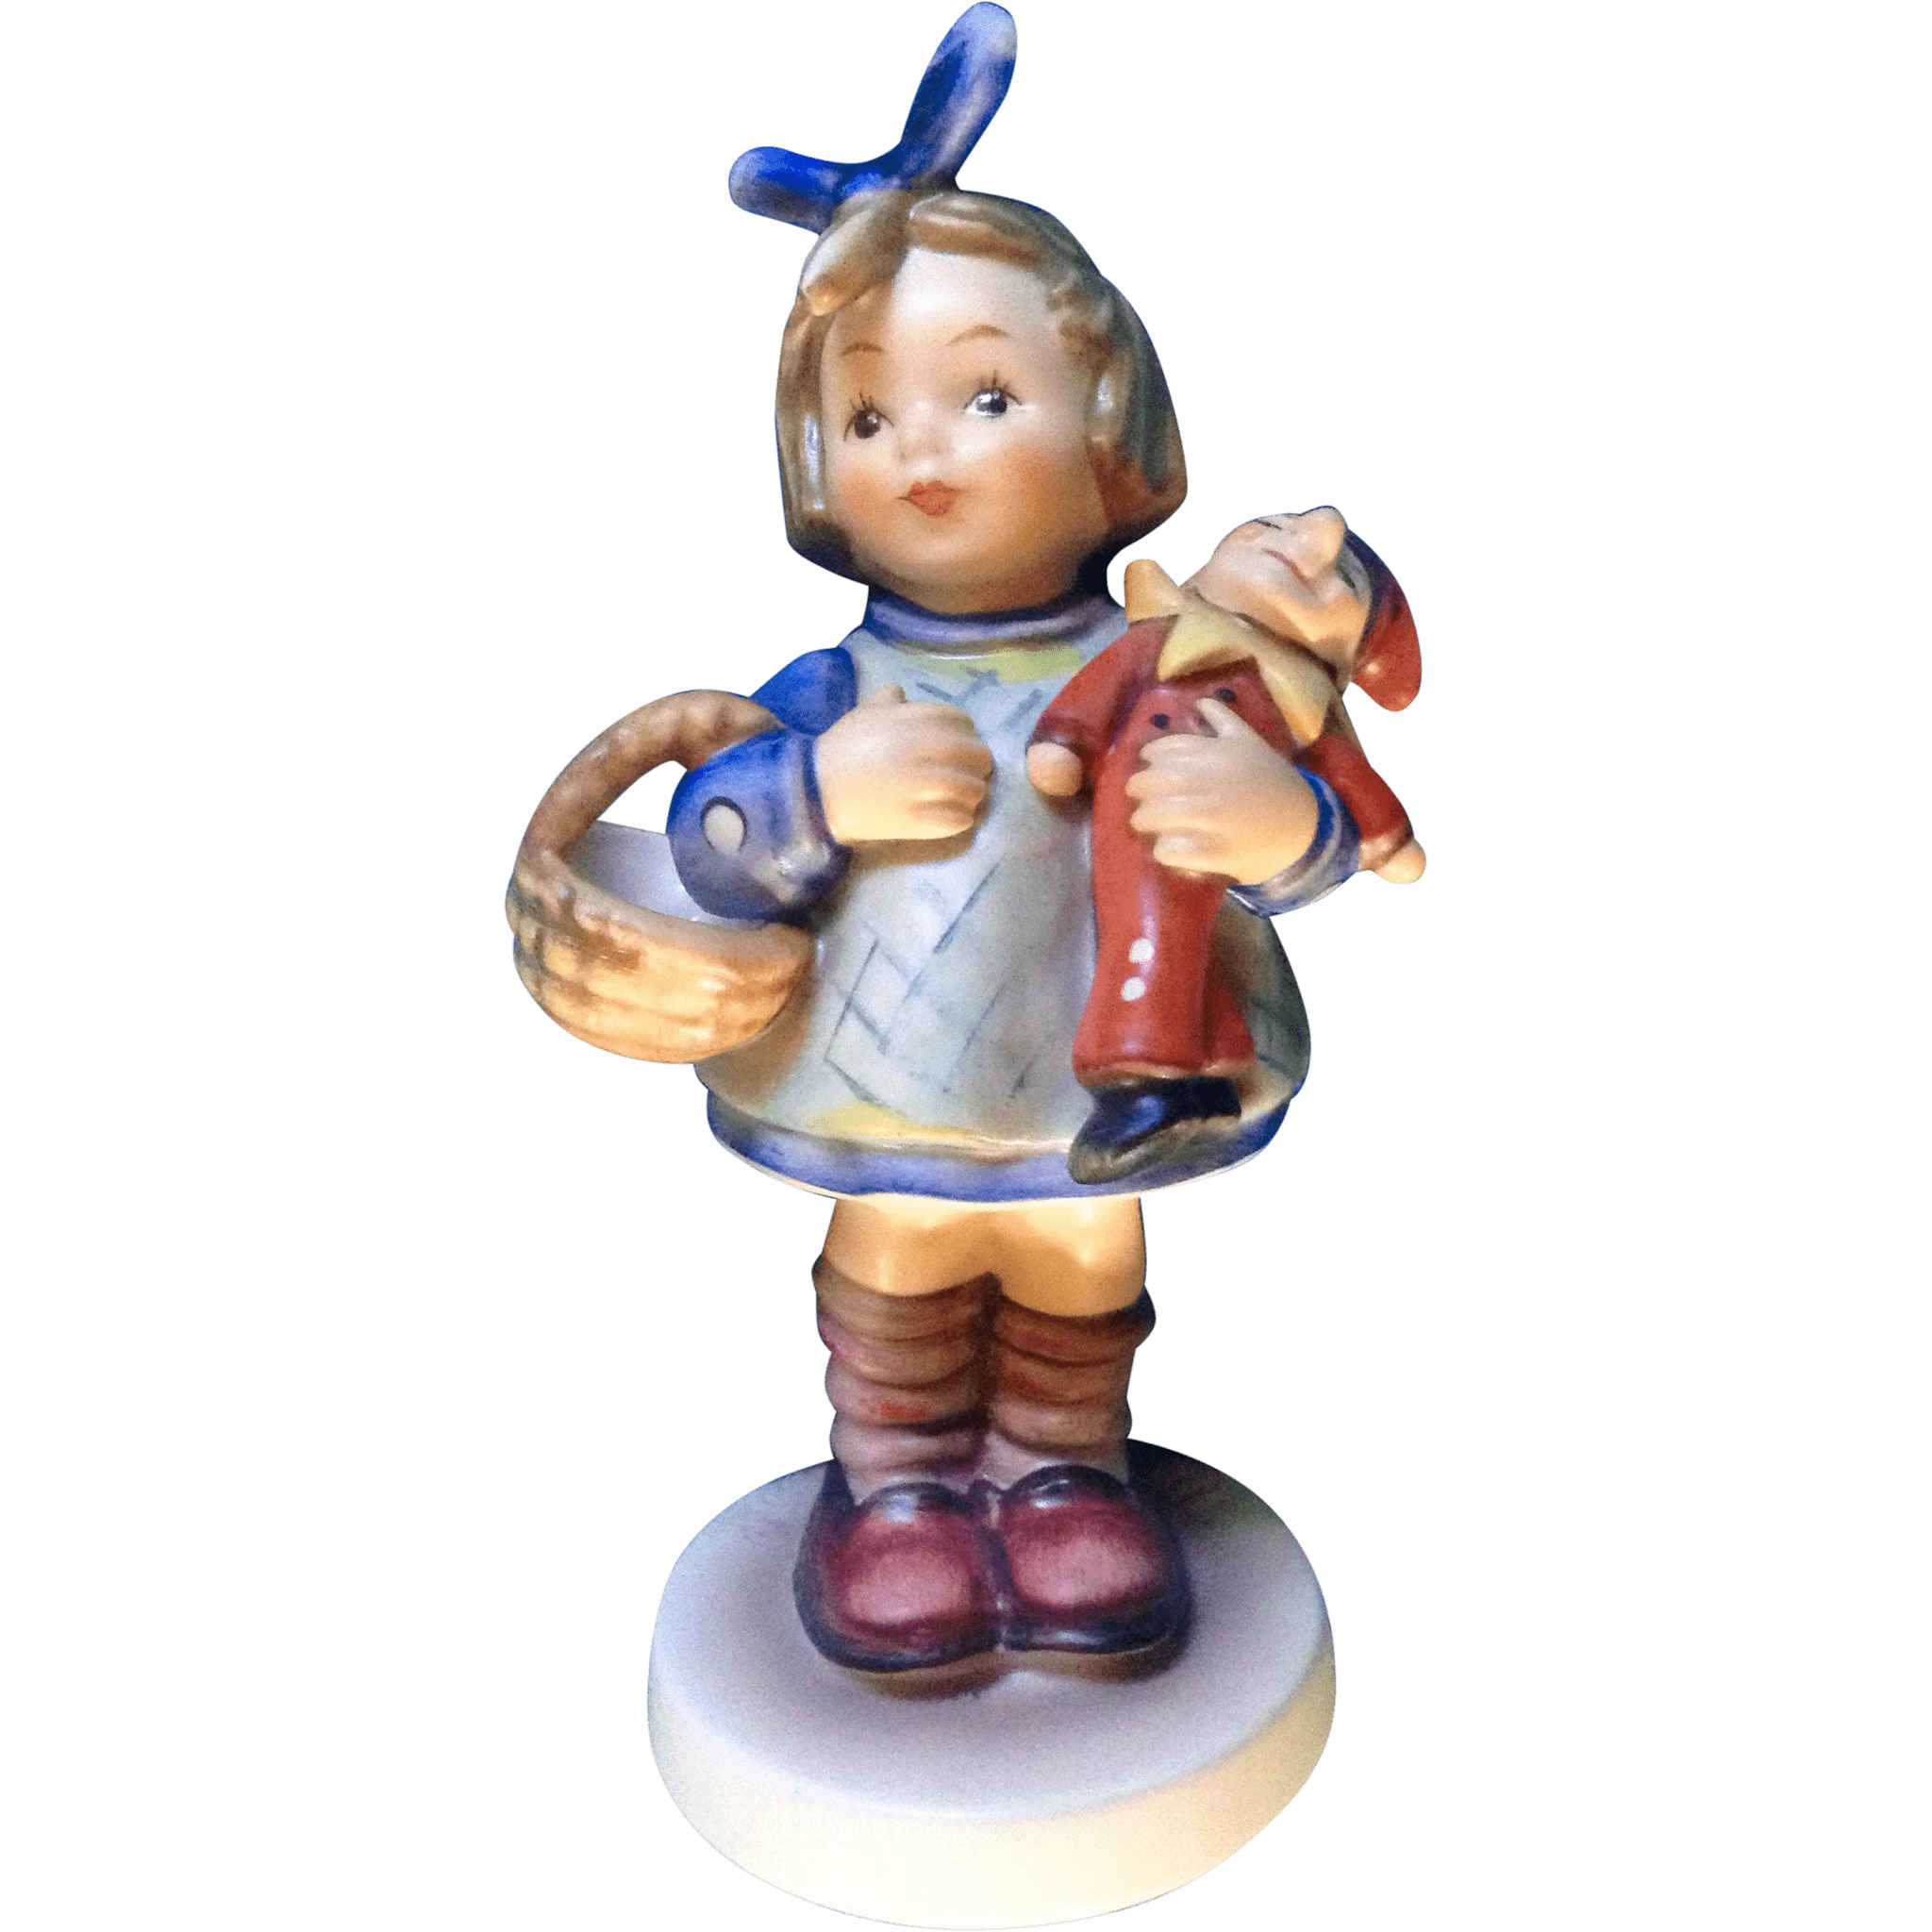 What Now Hummel Figurine icons